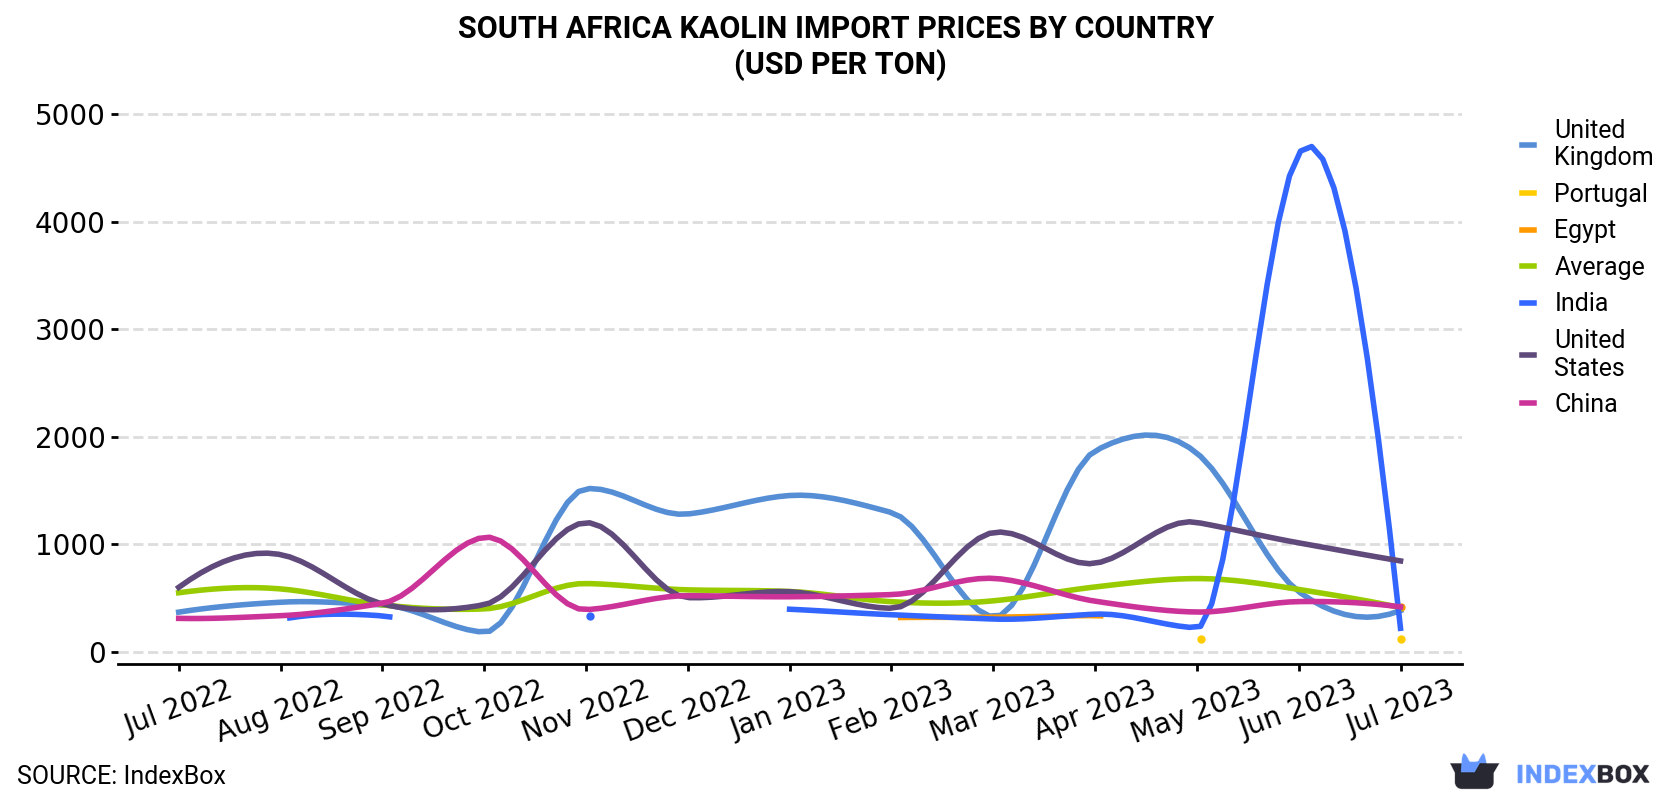 South Africa Kaolin Import Prices By Country (USD Per Ton)